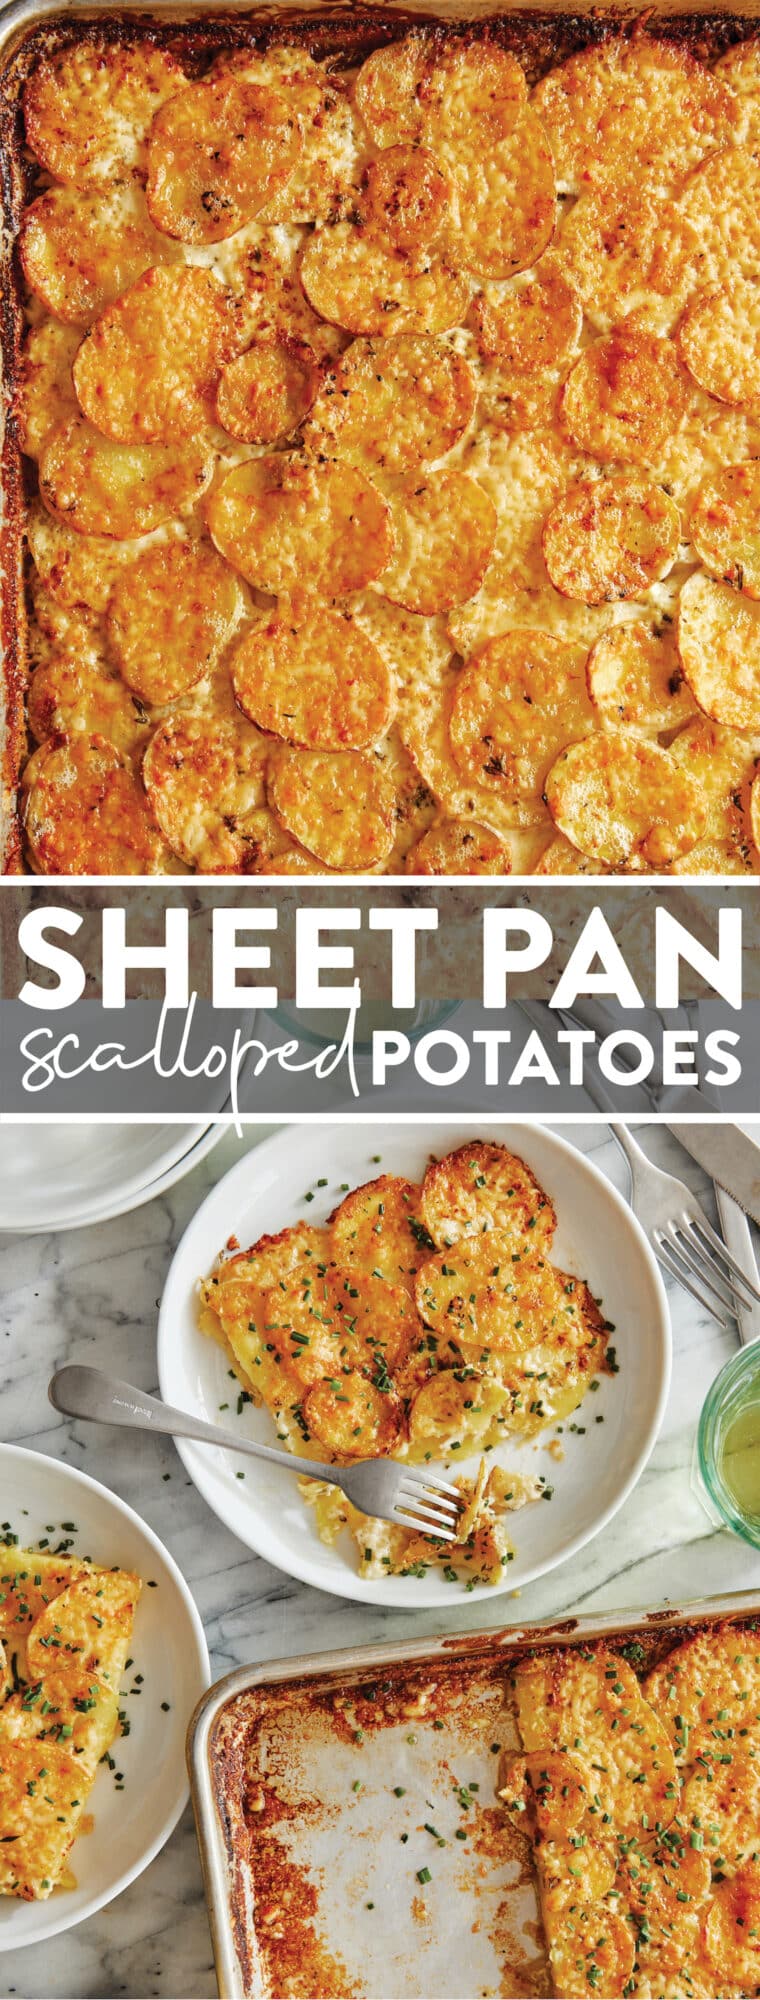 Sheet Pan Scalloped Potatoes - The best part is the crispiest edges and tops ALL AROUND with the creamiest goodness underneath. So so good!